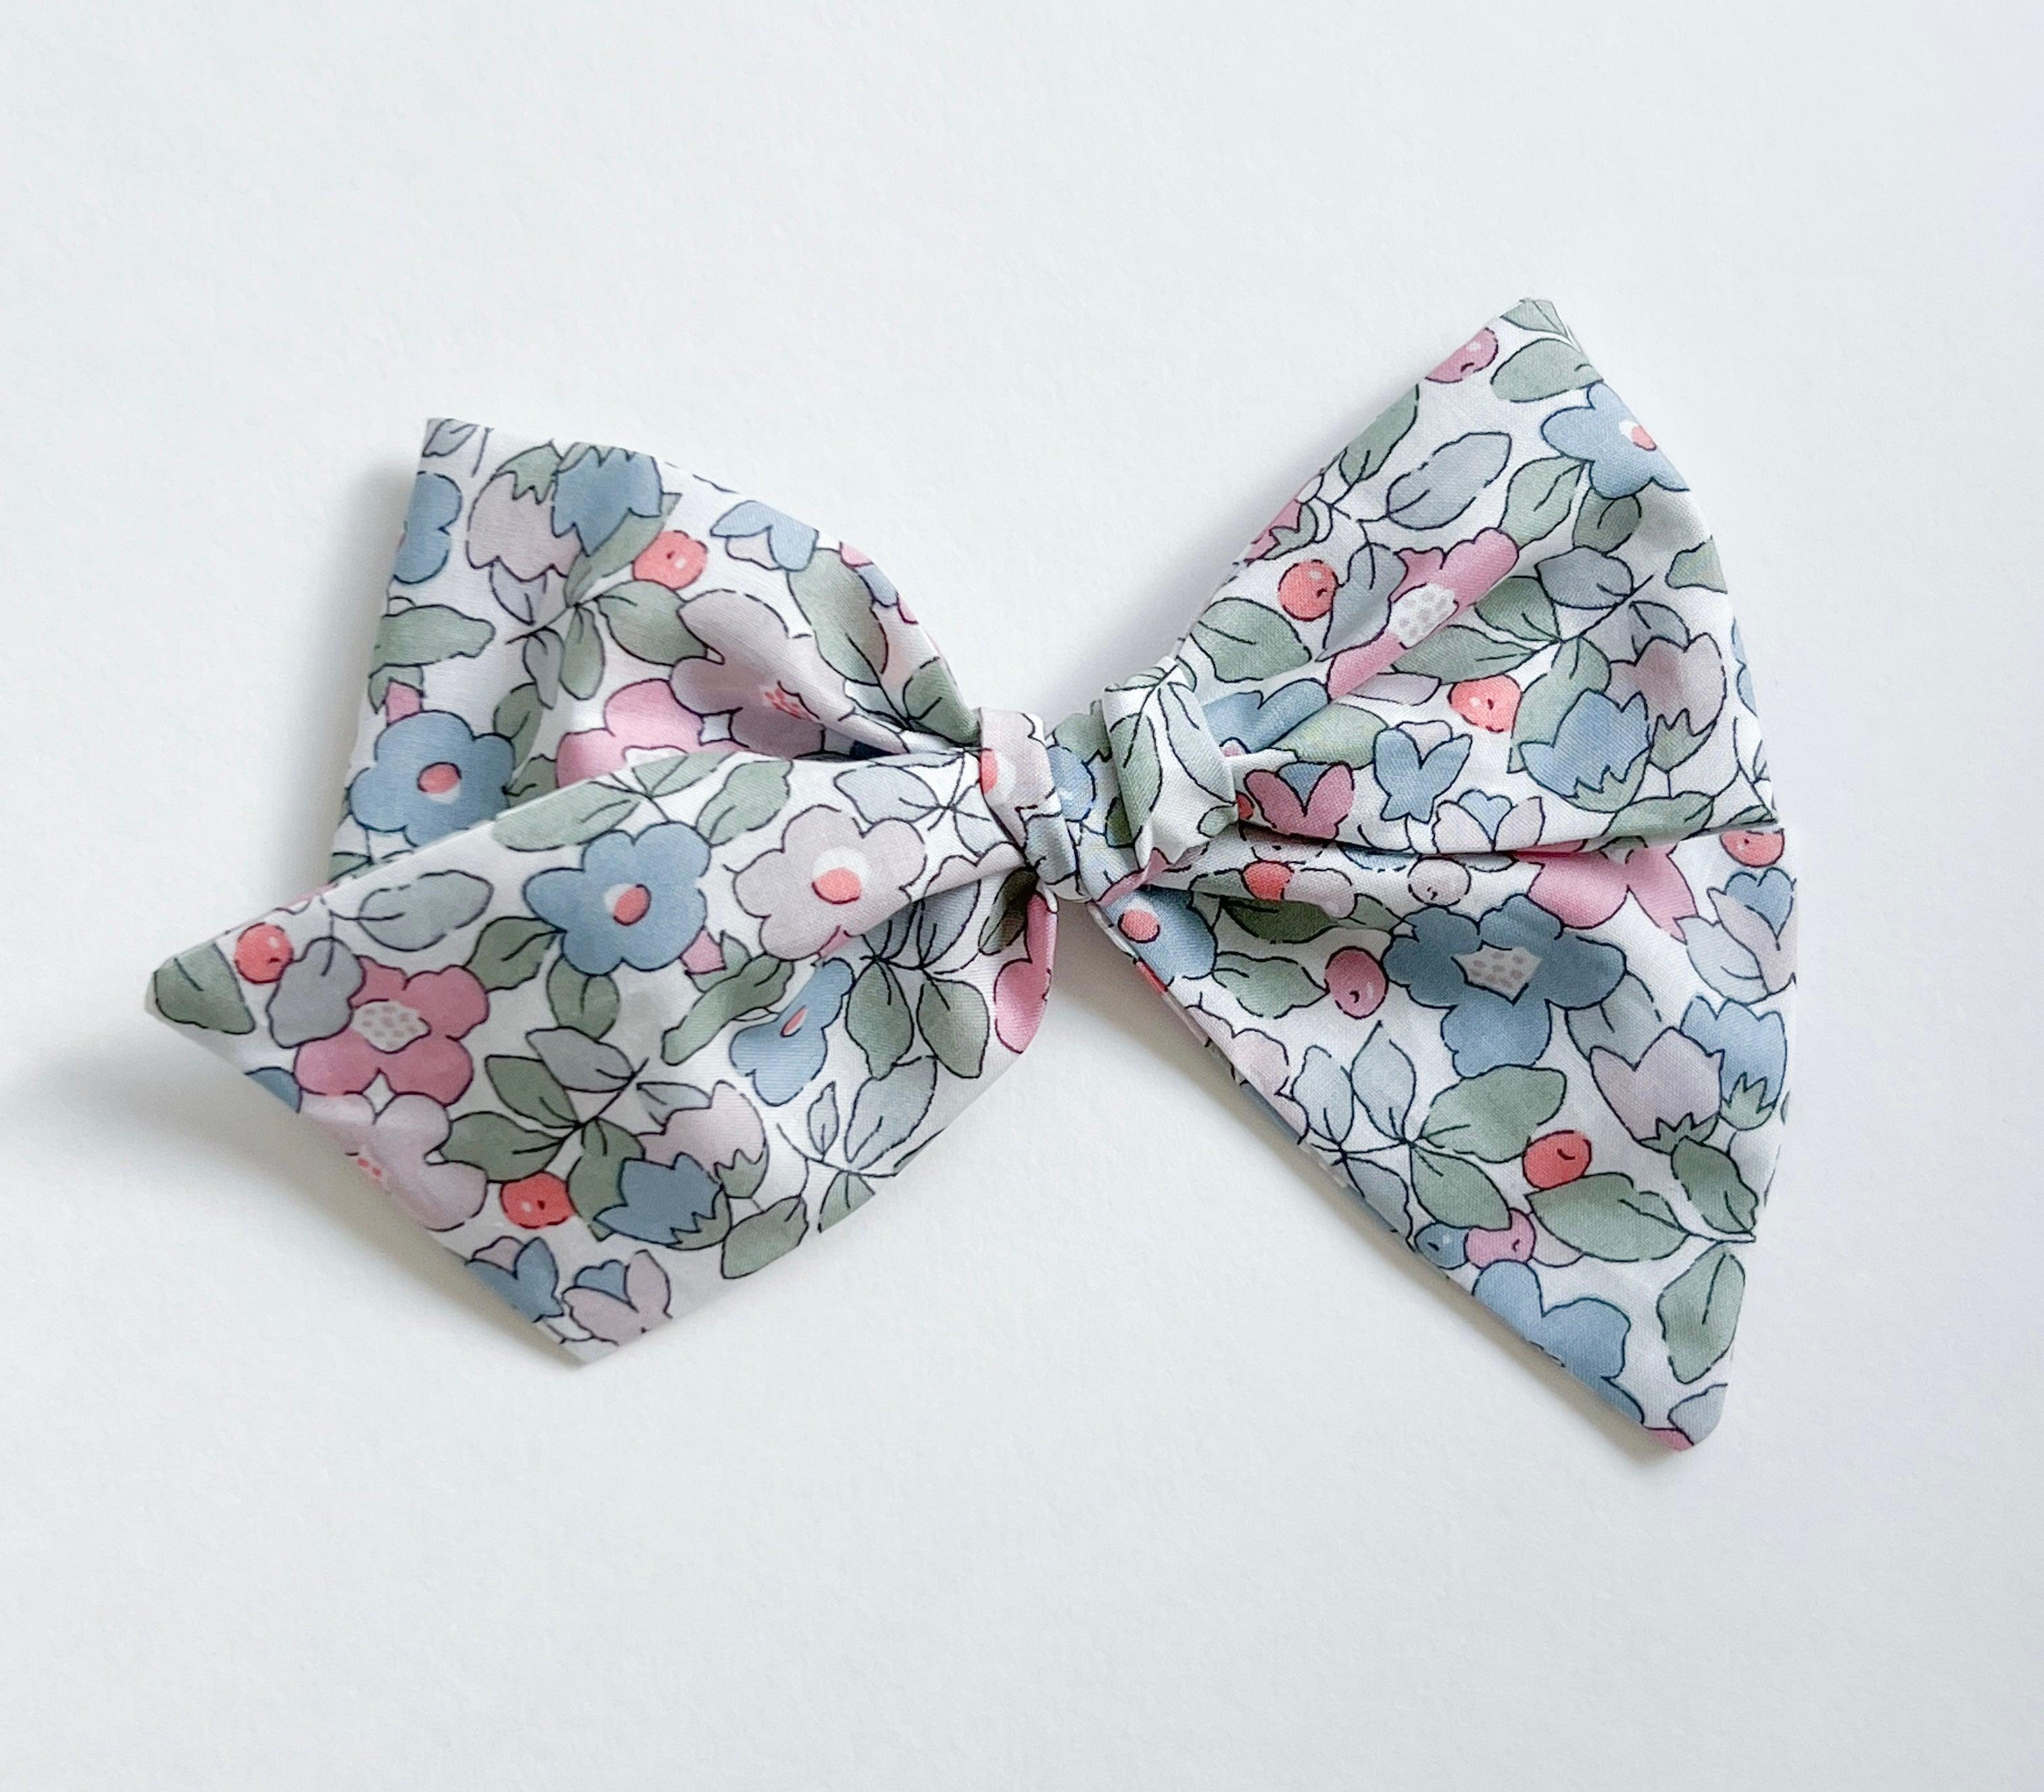 Jumbo Pinwheel Bow - Liberty Betsy | Nashville Bow Co. - Classic Hair Bows, Bow Ties, Basket Bows, Pacifier Clips, Wreath Sashes, Swaddle Bows. Classic Southern Charm.